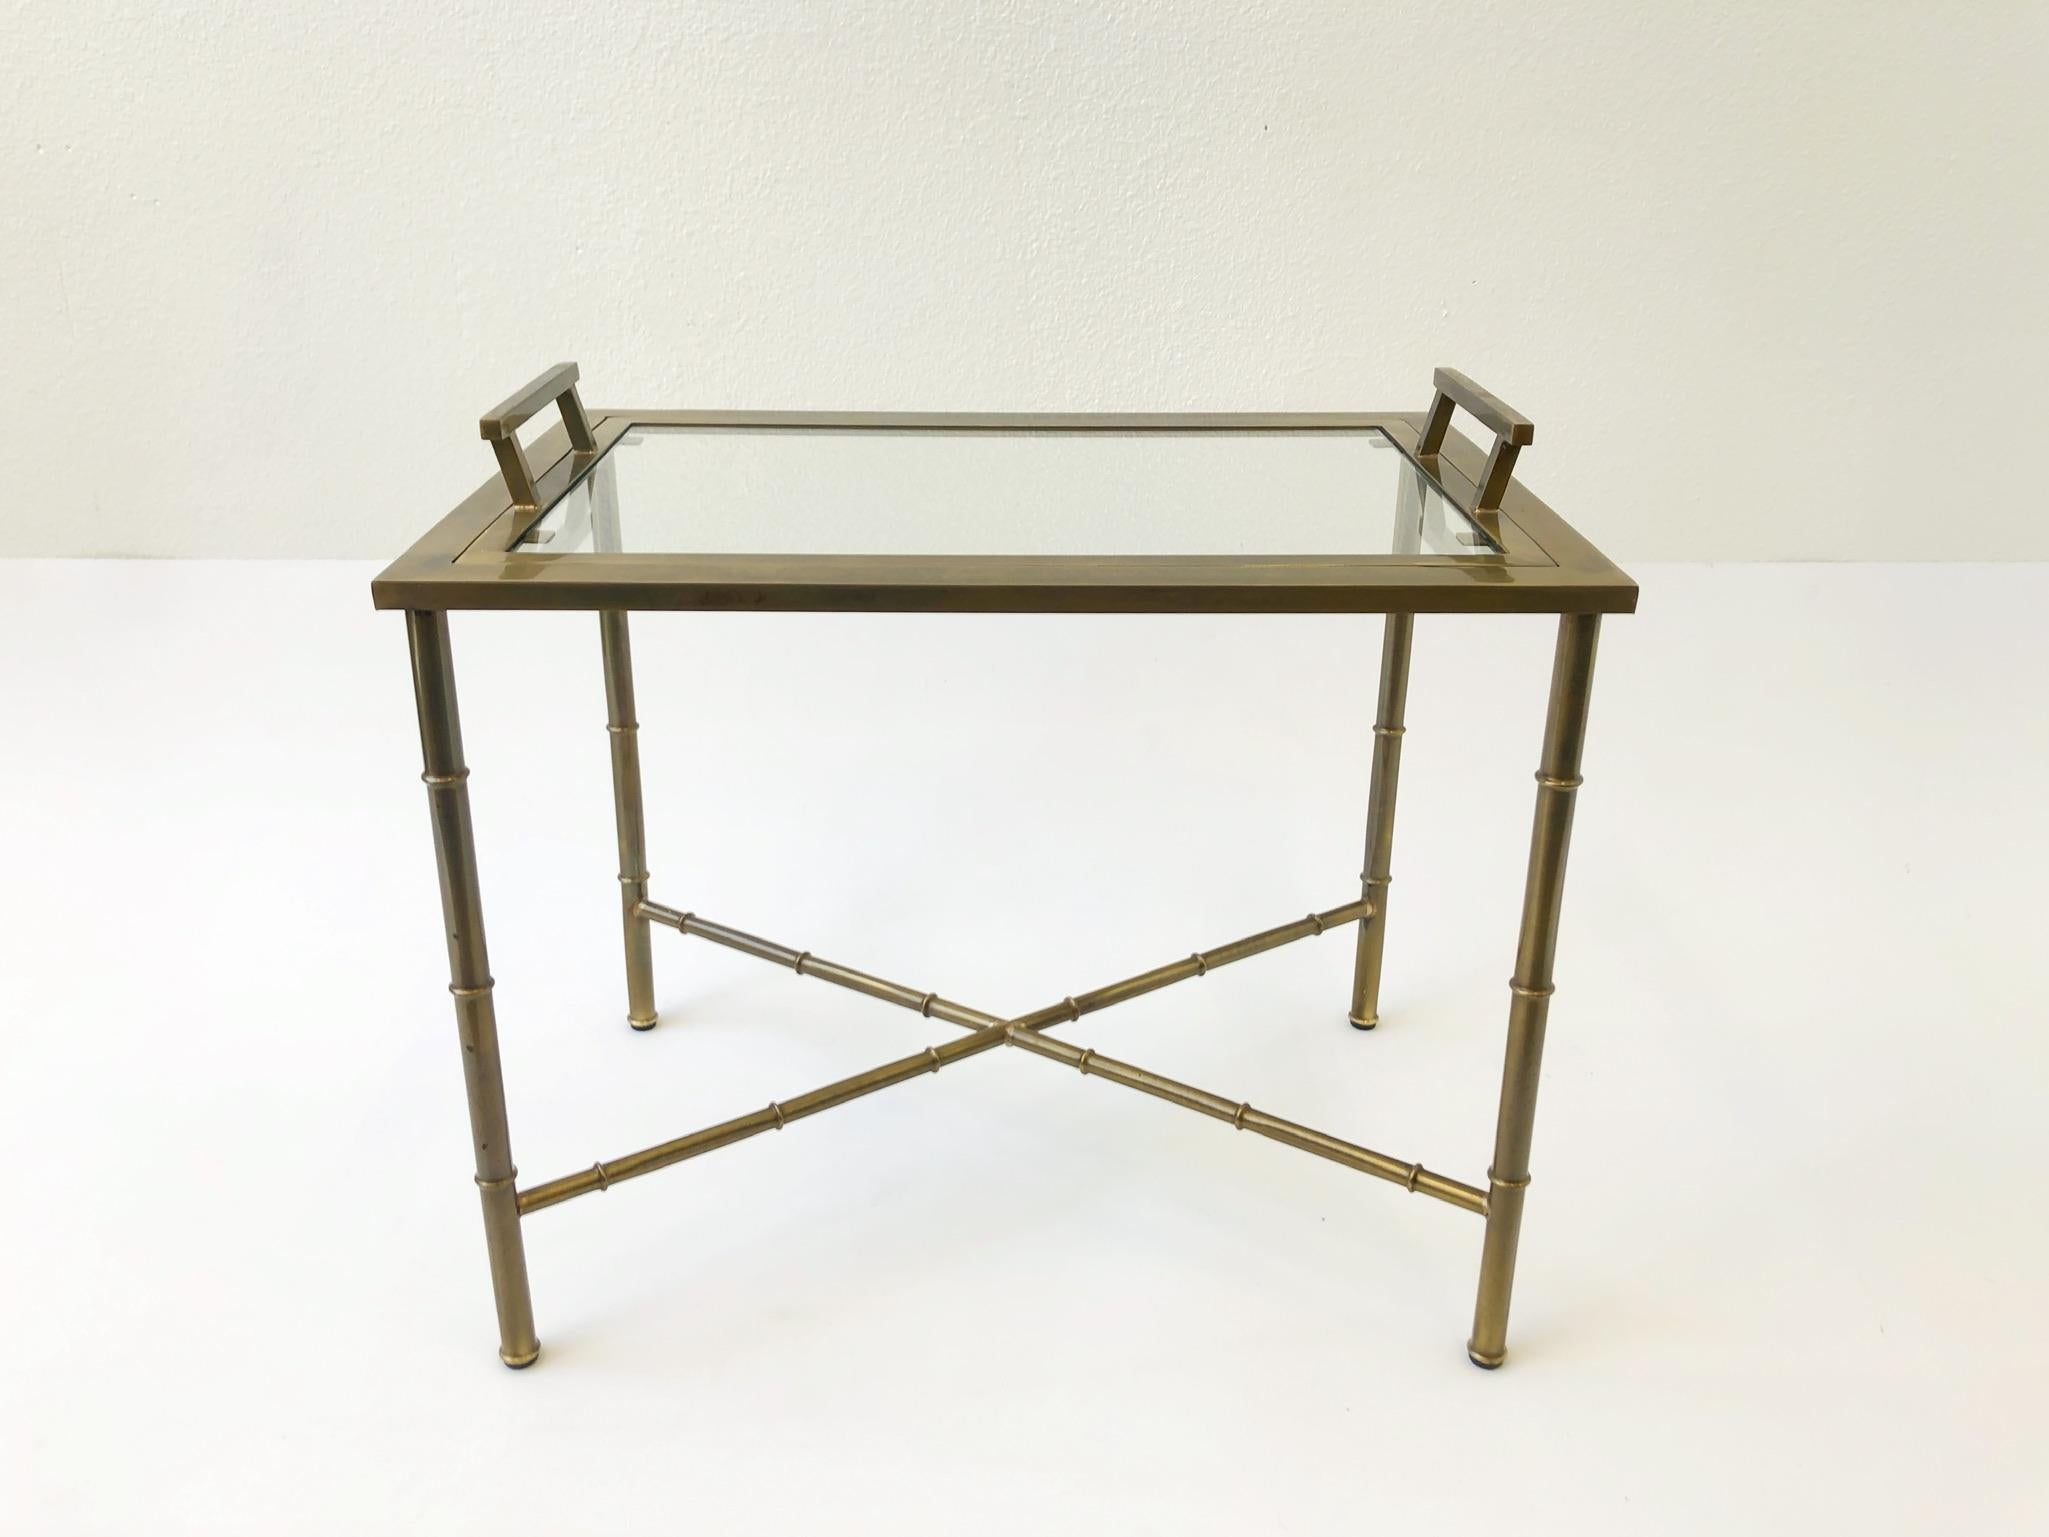 Hollywood Regency Aged Brass and Glass Faux Bamboo Tray Table by Mastercraft